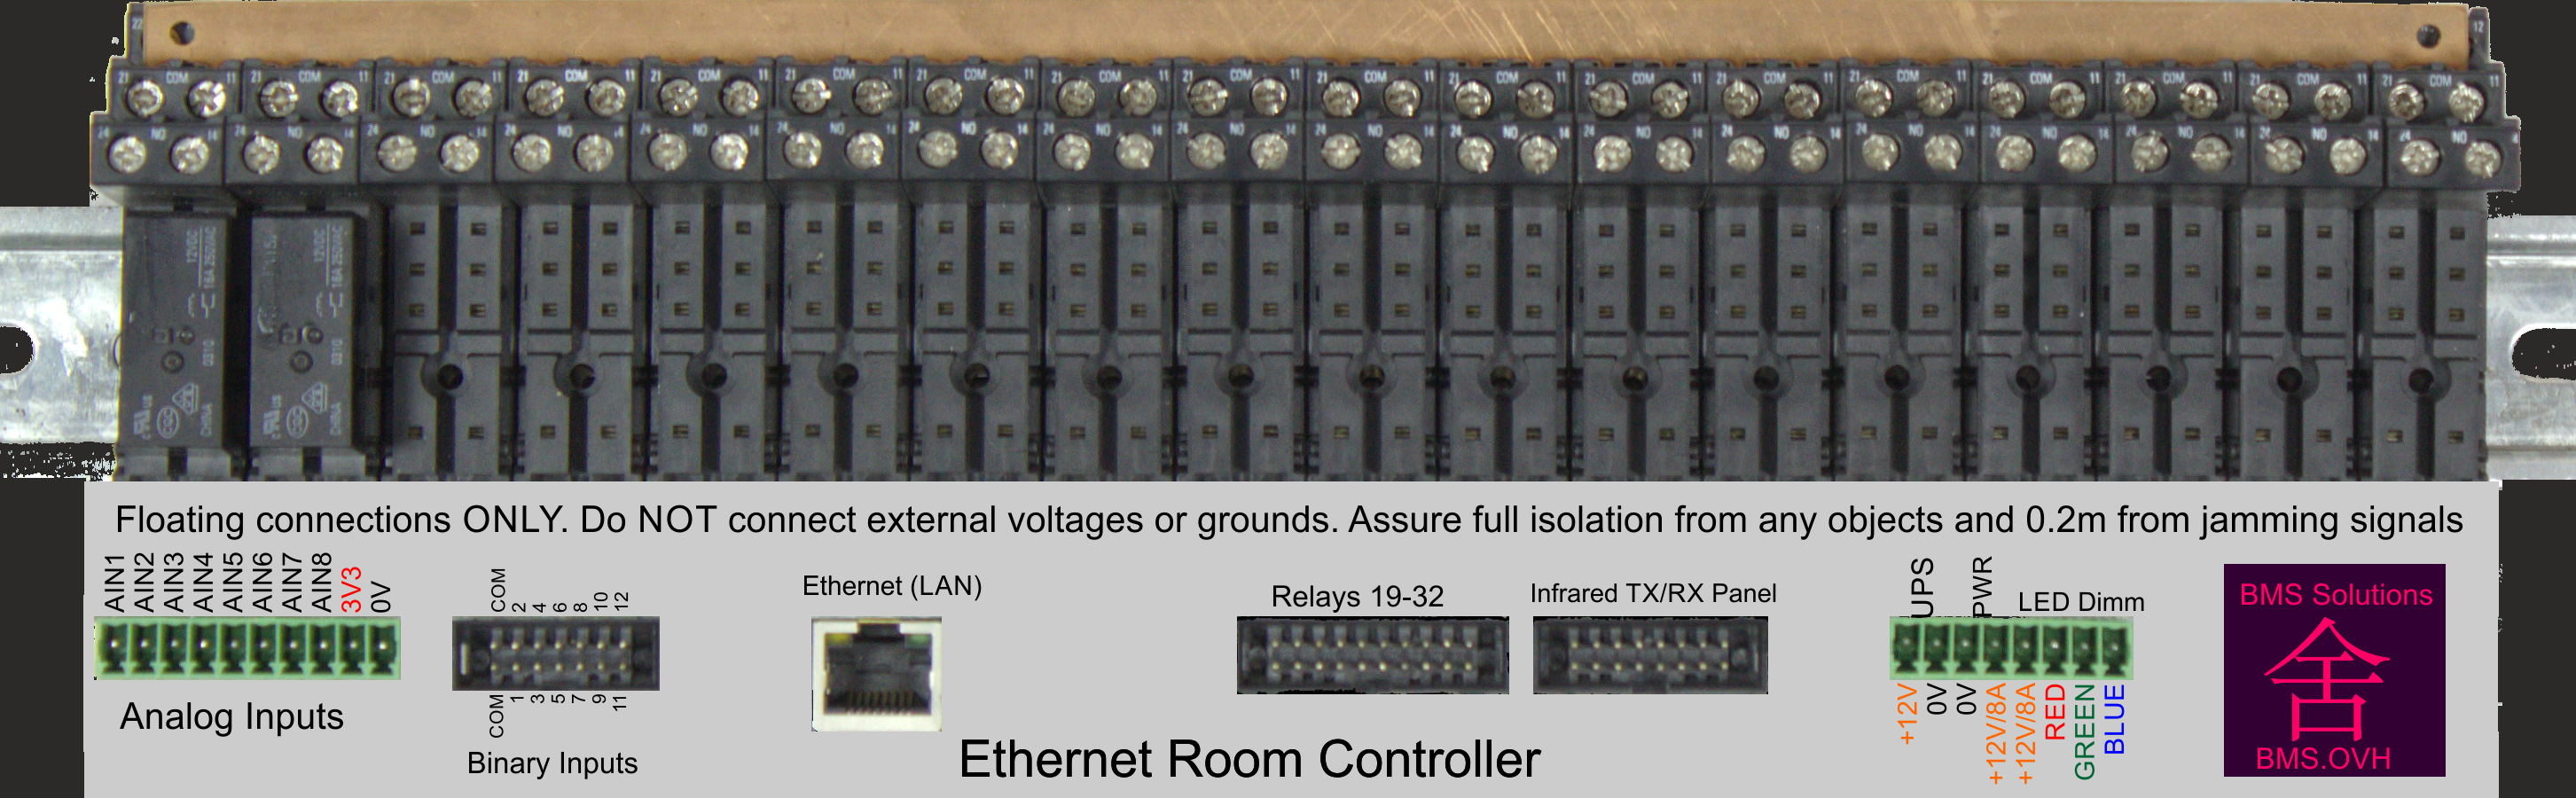 LAN Room Controller with external Relays and cover